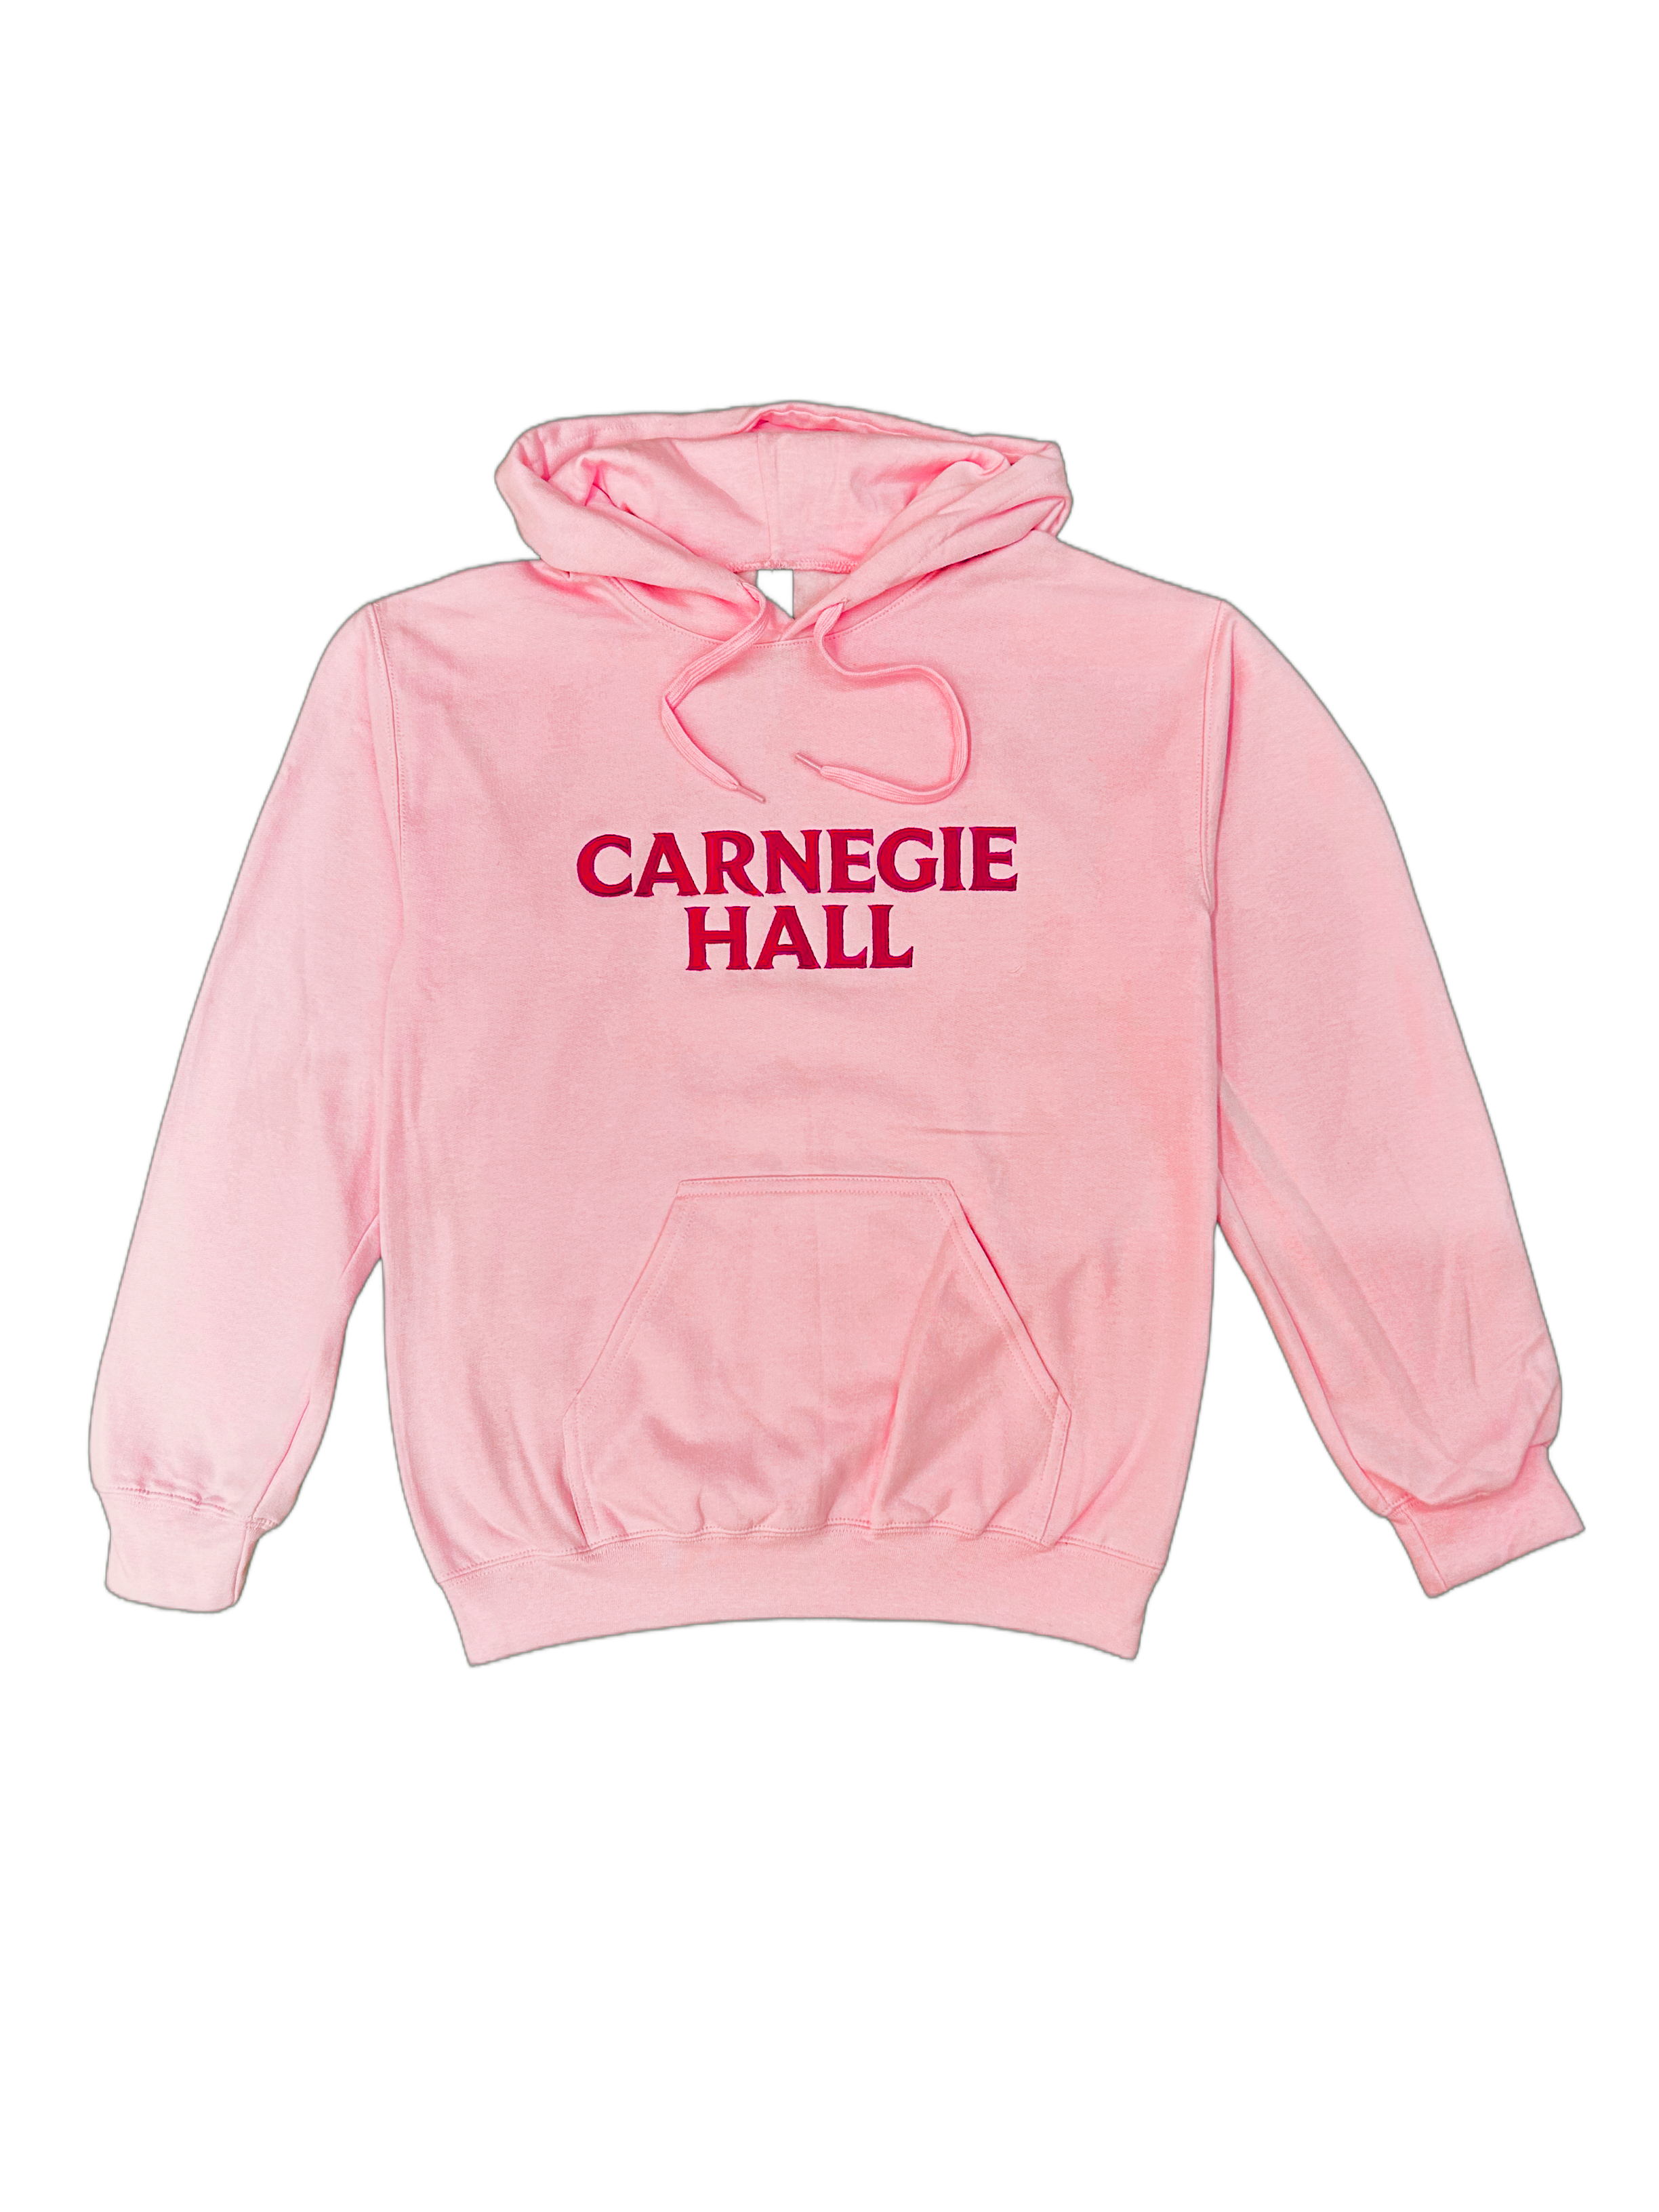 Rose Hooded Pullover Sweatshirt (Red Embroidered Logo)